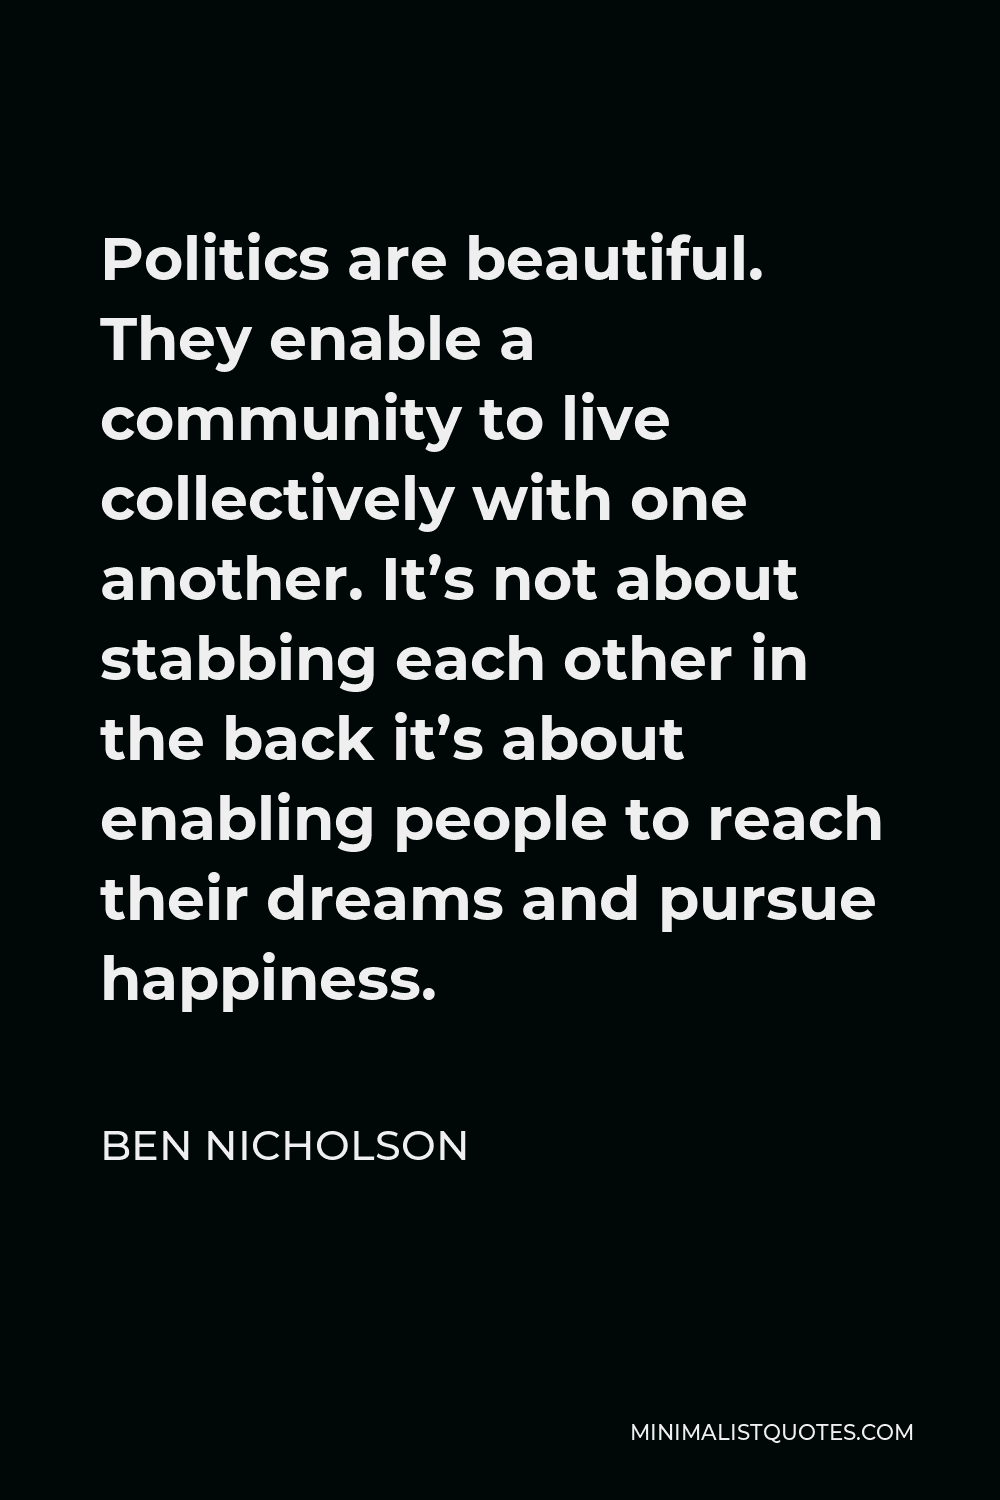 Ben Nicholson Quote - Politics are beautiful. They enable a community to live collectively with one another. It’s not about stabbing each other in the back it’s about enabling people to reach their dreams and pursue happiness.